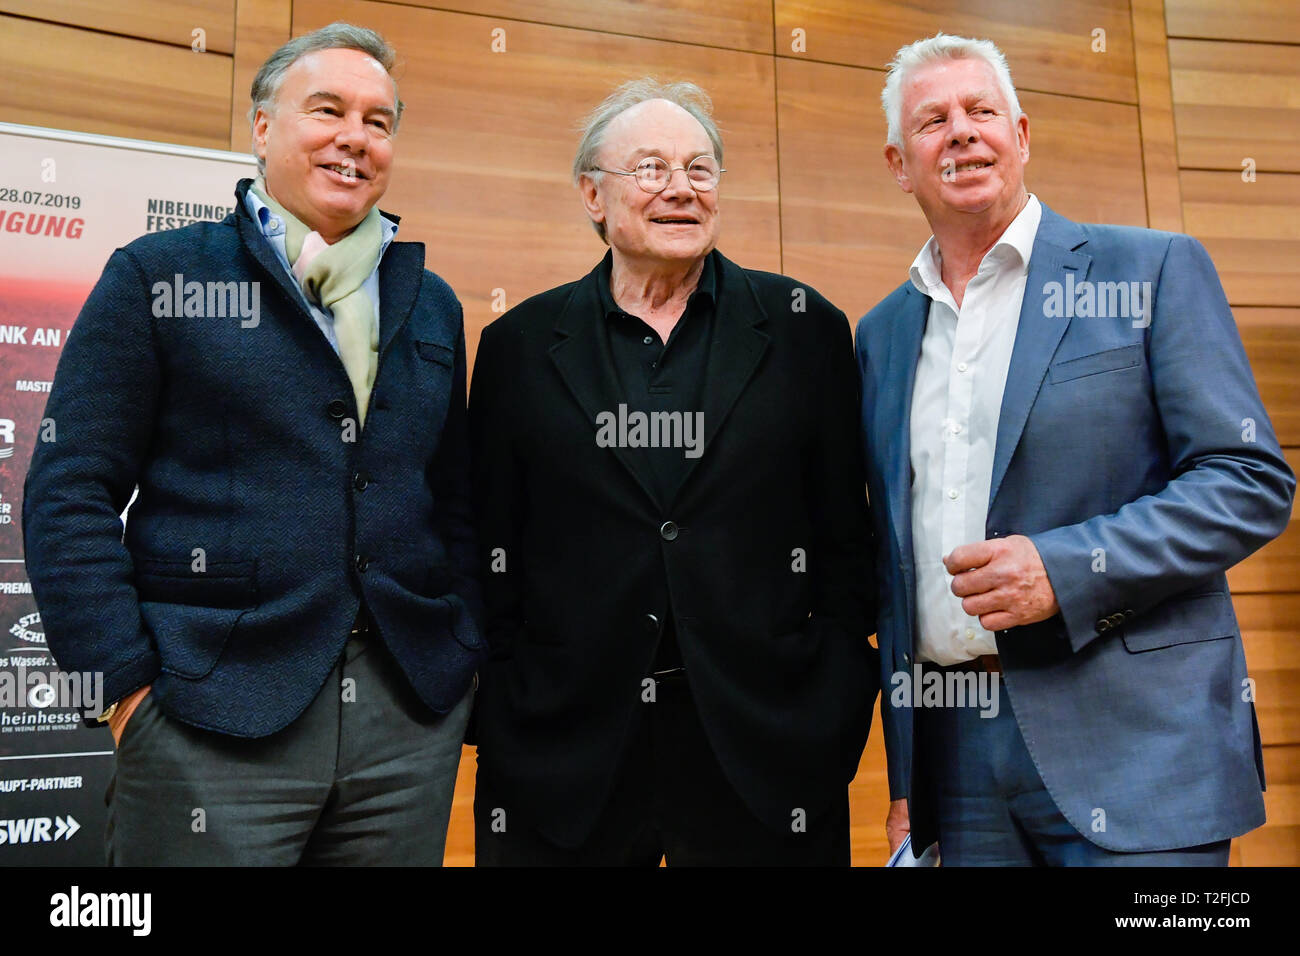 Worms, Germany. 02nd Apr, 2019. Intendant Nico Hofmann (l-r), actor Klaus Maria Brandauer and Michael Kissel (SPD), Lord Mayor of the City of Worms, are about to hold a press conference on the Nibelungen Festival at the conference centre 'Das Wormser'. The Nibelungen Festival will take place from 12 to 28 July 2019. Credit: Uwe Anspach/dpa/Alamy Live News Stock Photo